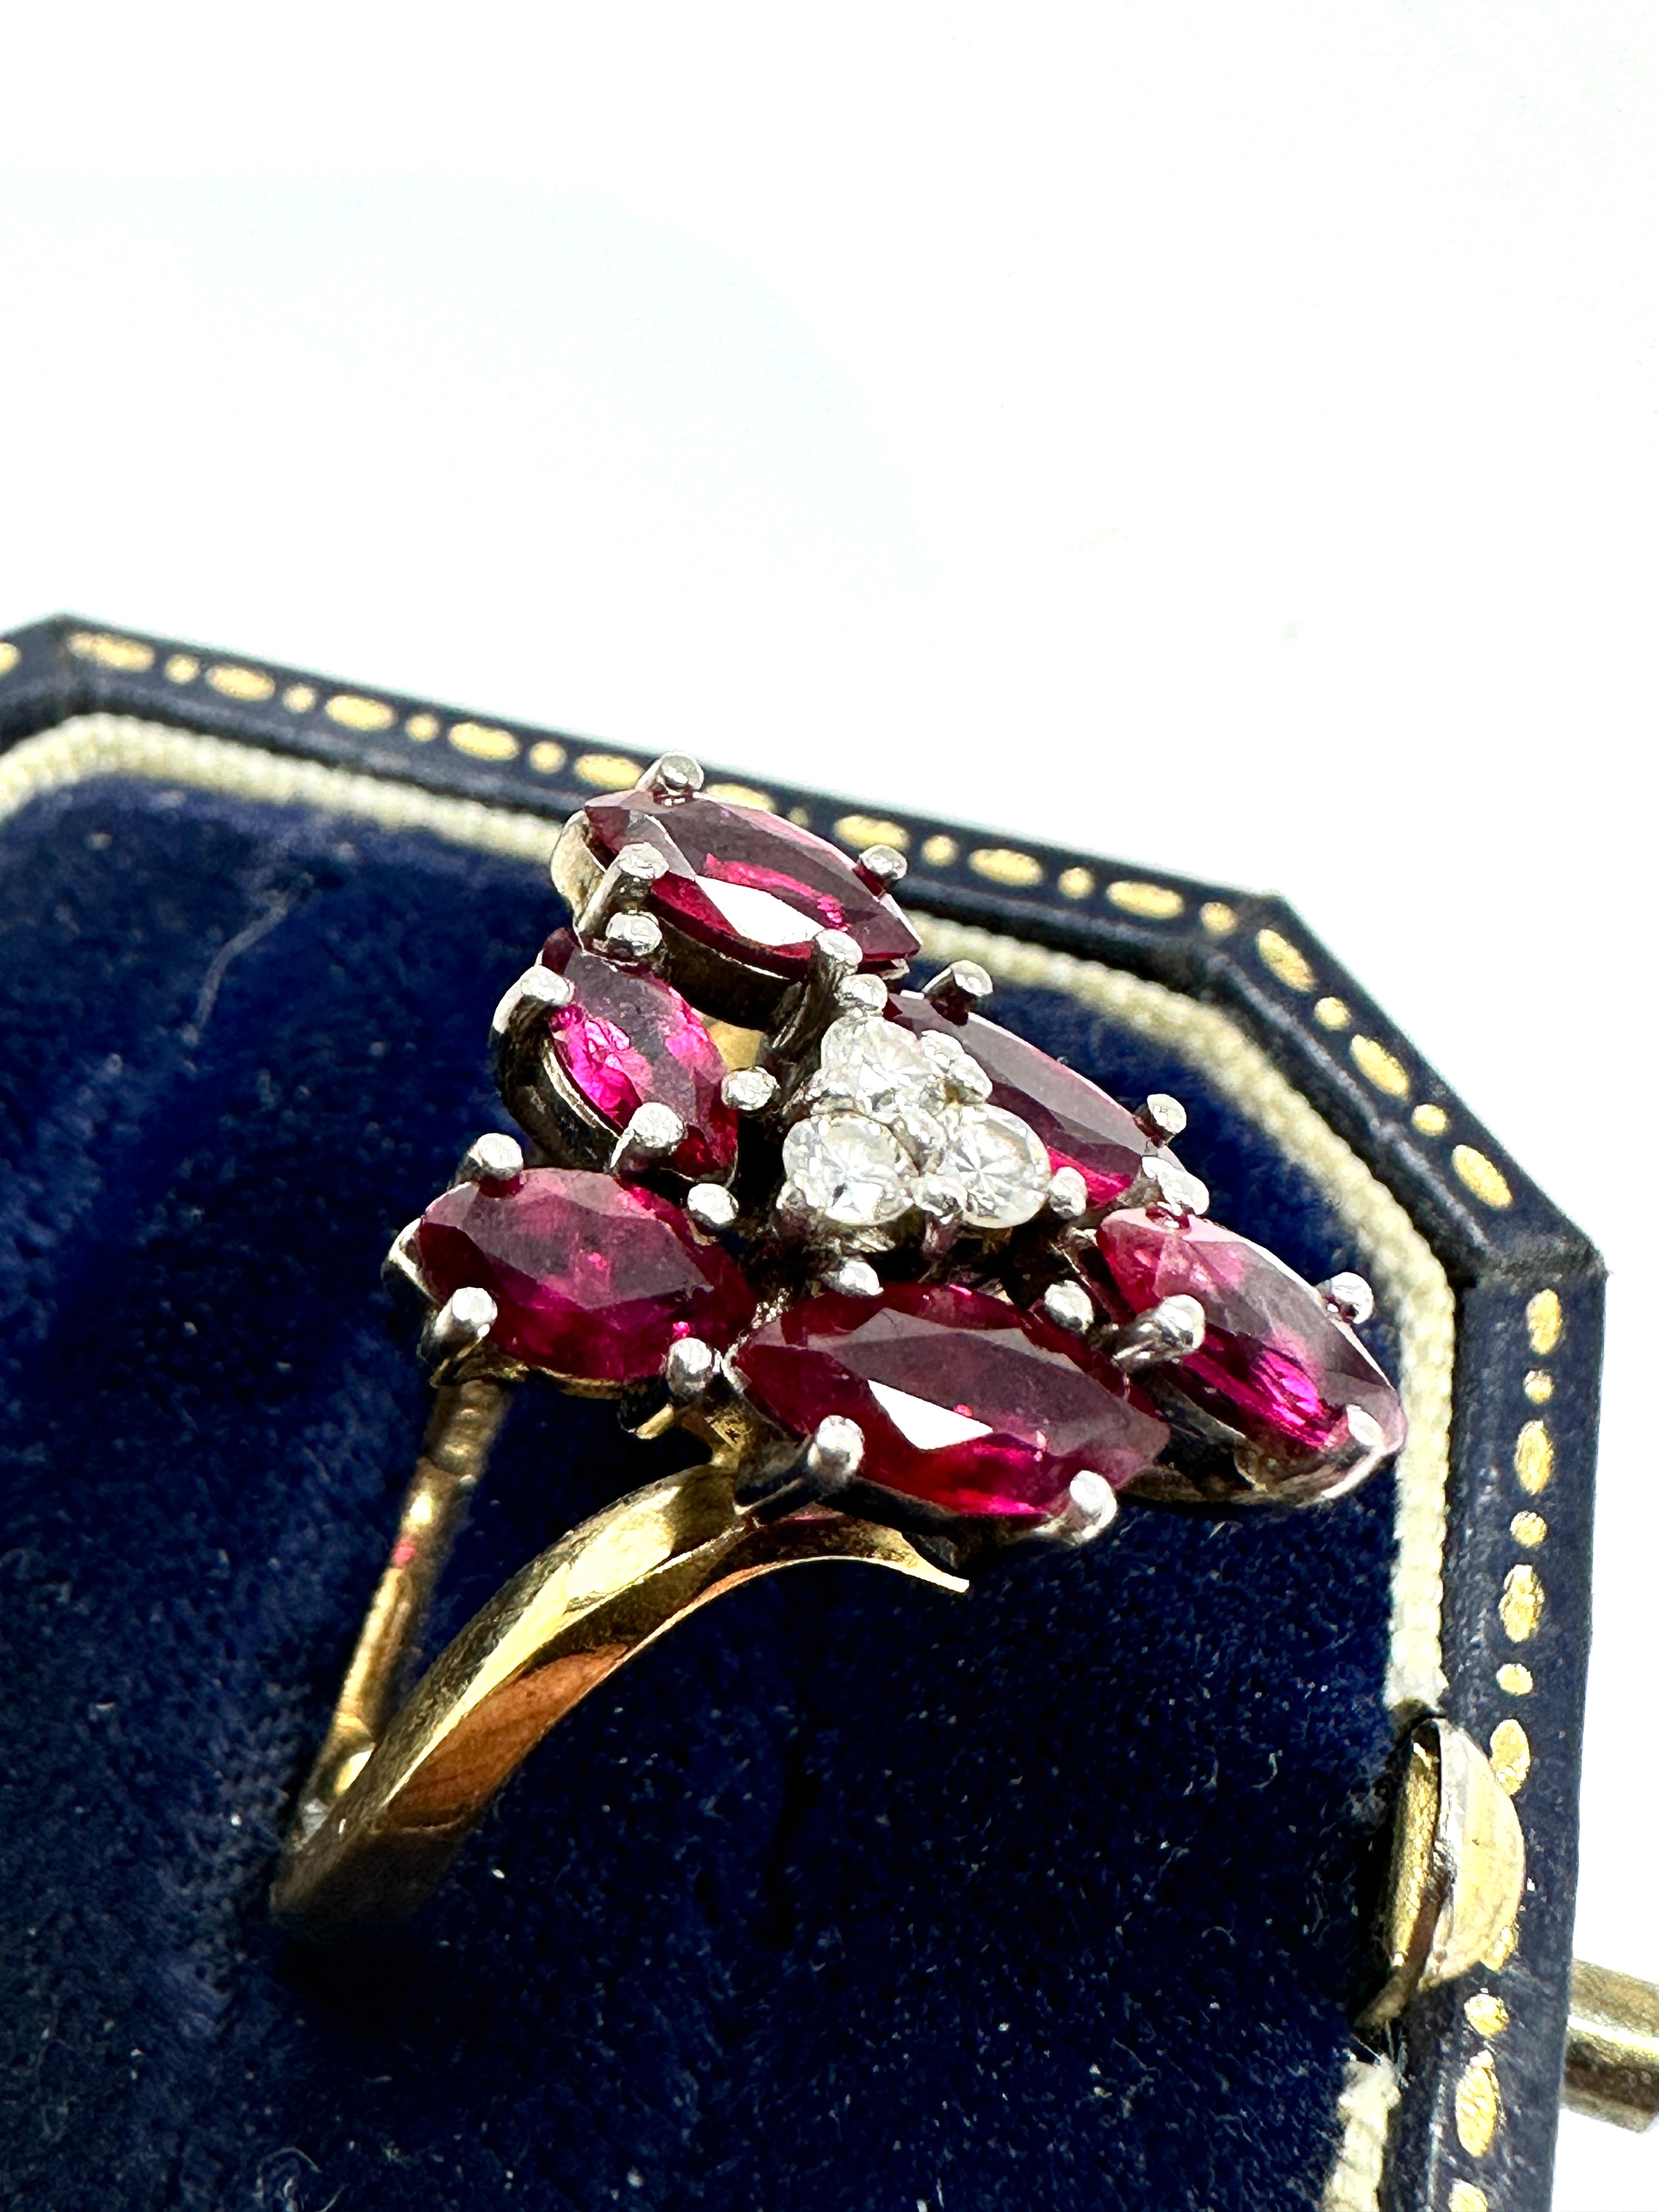 18ct gold ruby & diamond ring weight 7.4g - Image 2 of 4